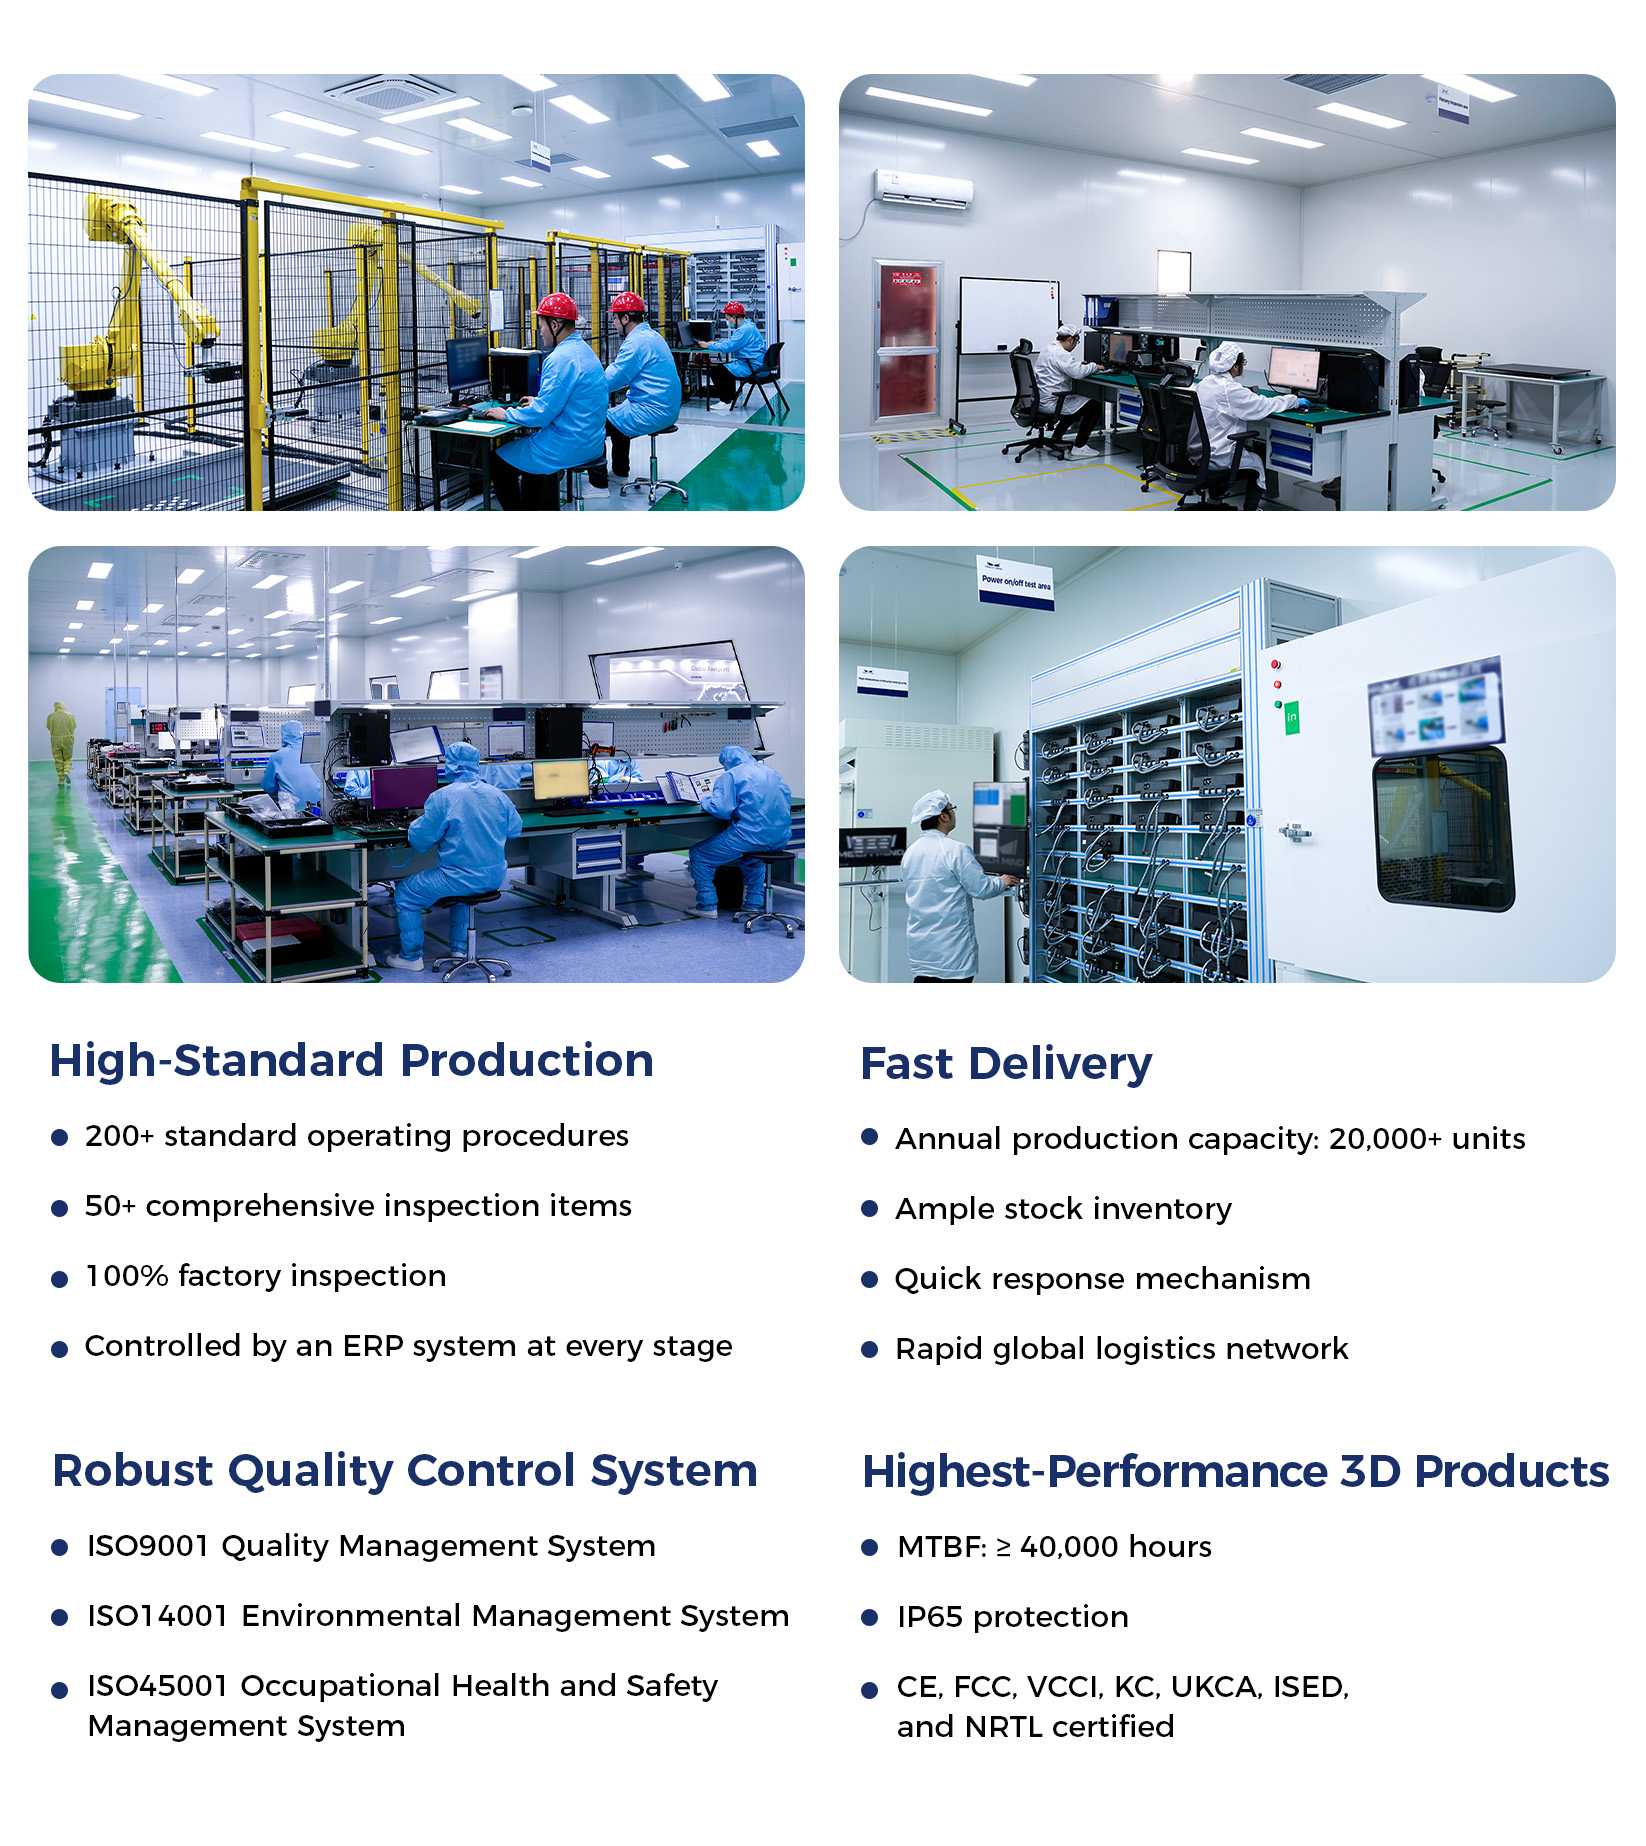 Mech-Mind's Self-Owned High-Standard Factory: Delivering High-Quality Products and Timely Global Supply Assurance